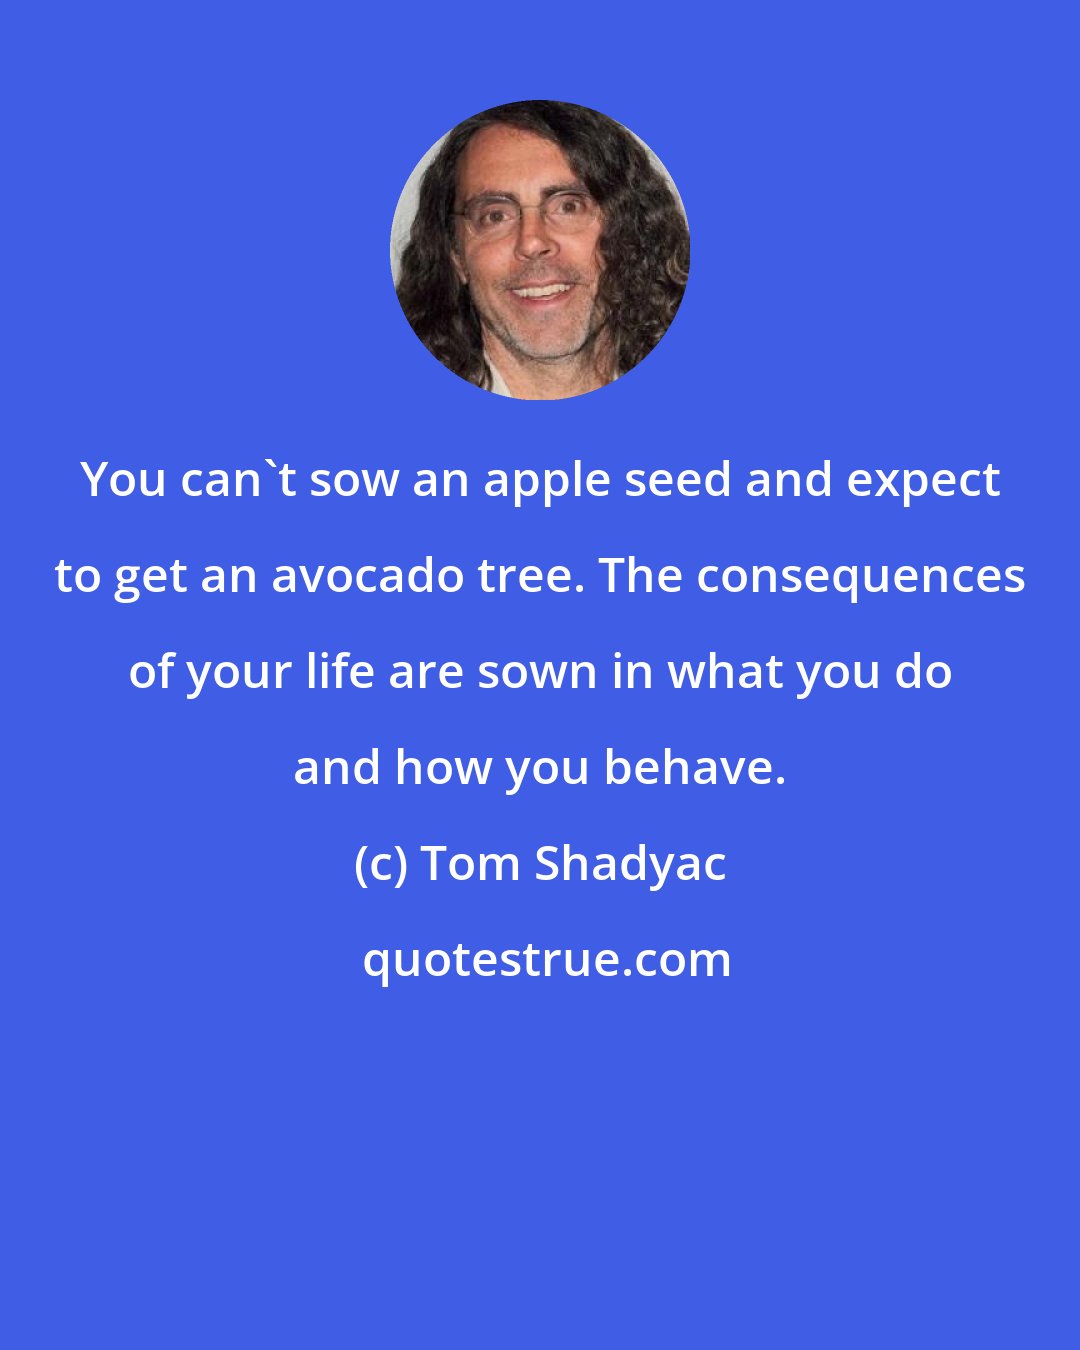 Tom Shadyac: You can't sow an apple seed and expect to get an avocado tree. The consequences of your life are sown in what you do and how you behave.